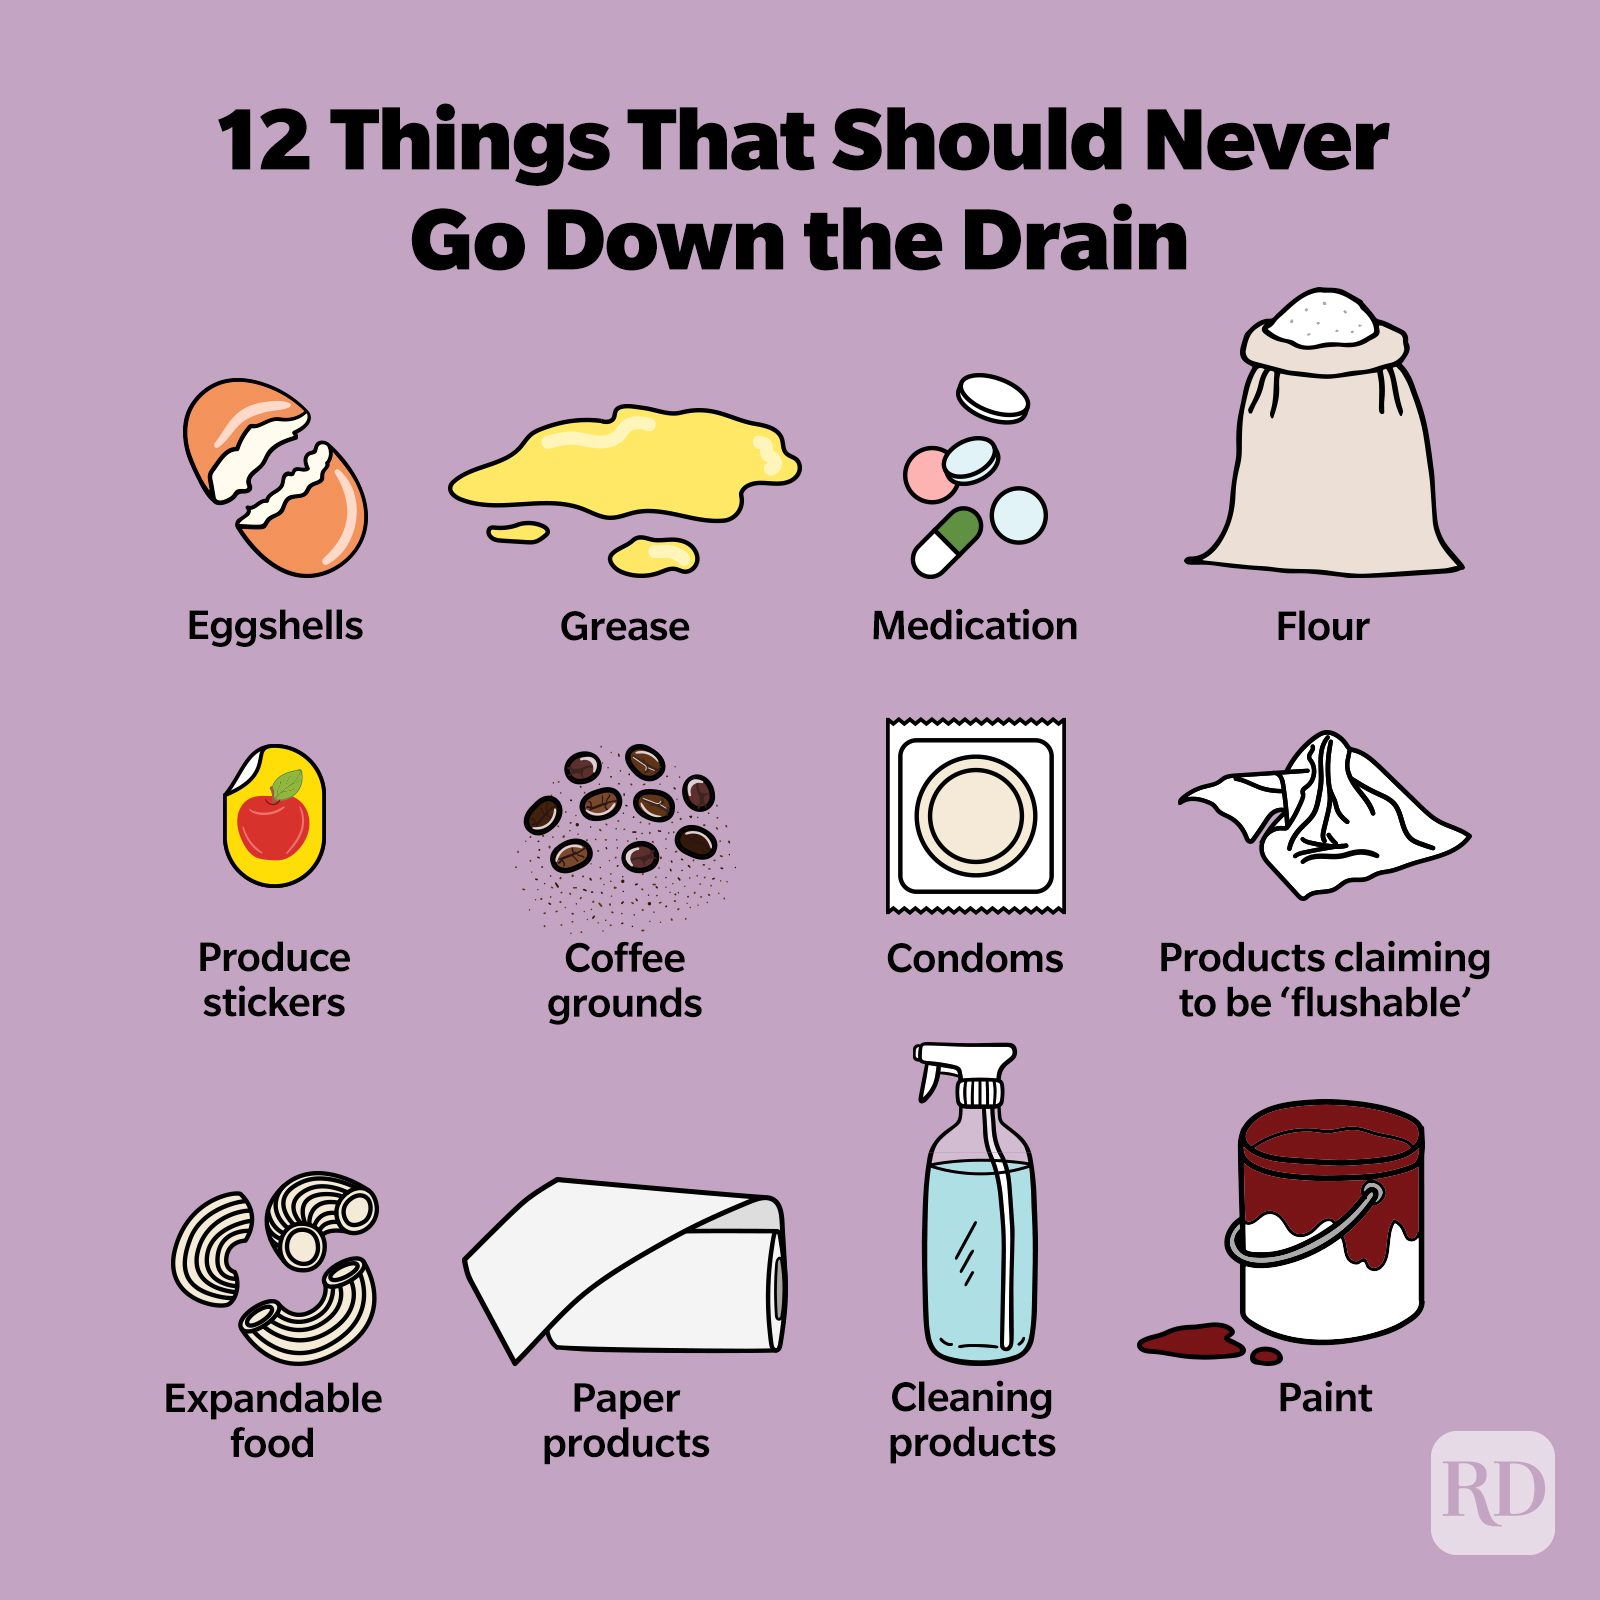 https://www.rd.com/wp-content/uploads/2021/06/12-Things-That-Should-Never-Go-Down-the-Drain-Infographic-GettyImages6.jpg?fit=700%2C700